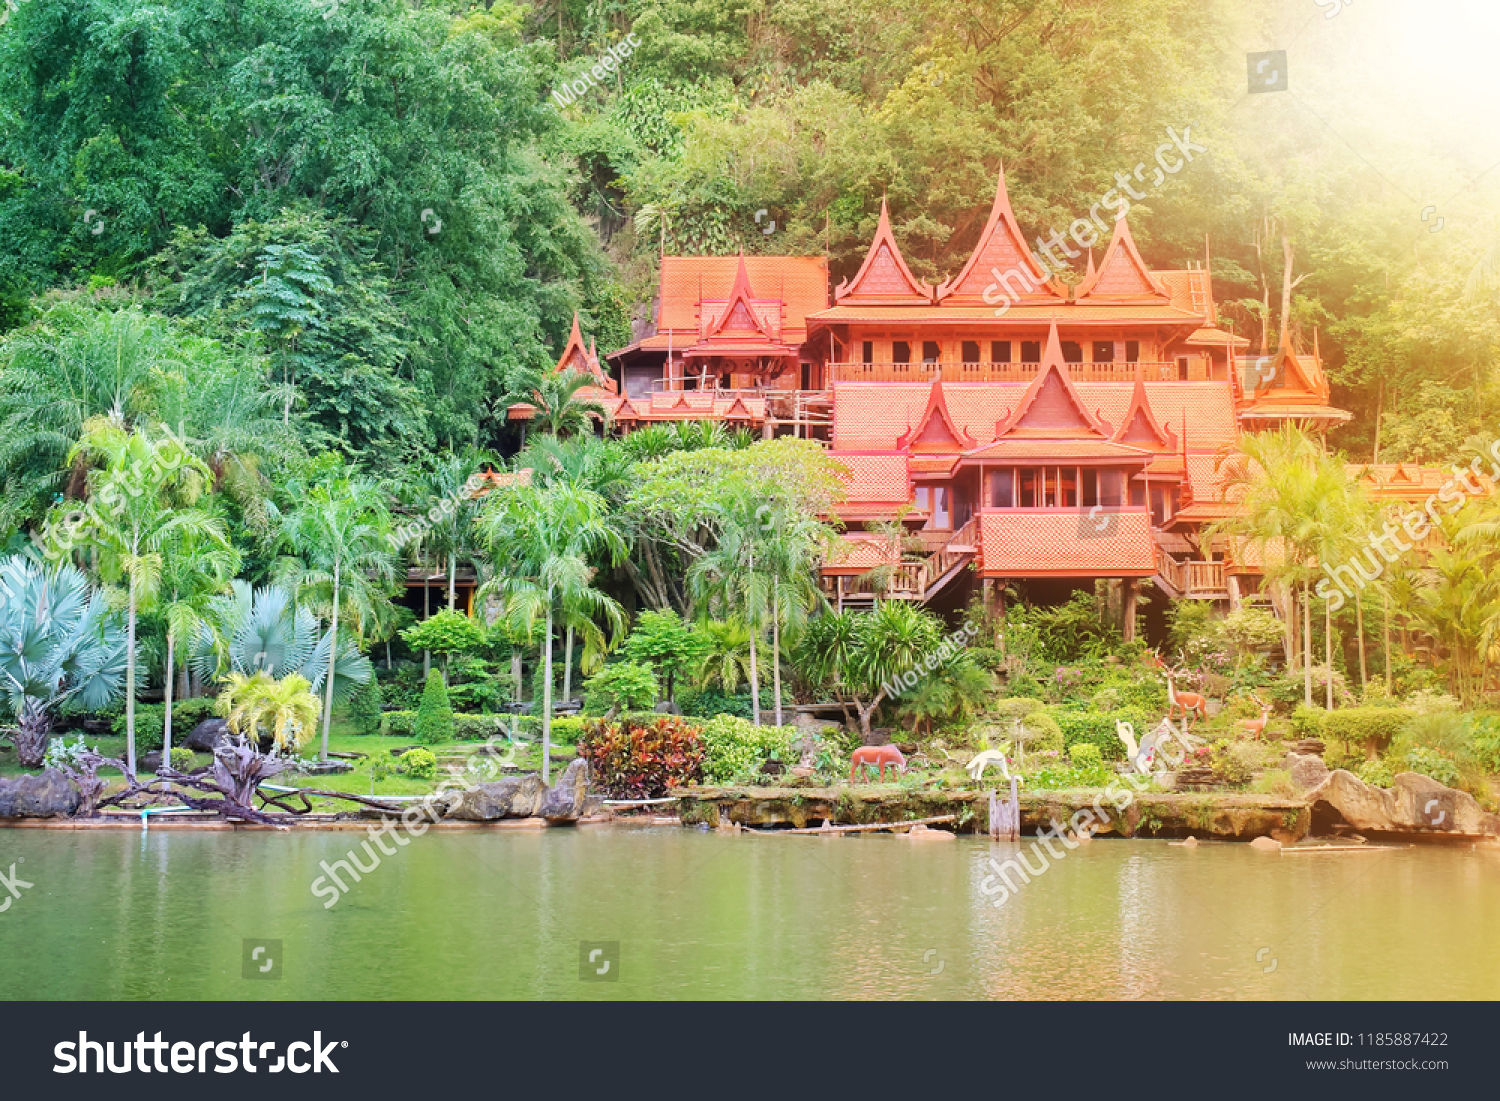 The buildings within the temple of Thailand are many trees and the mountains are the background. Public Attractions in Thailand. Khao Wong Temple in Uthai Thani in Thailand. Flare. #1185887422